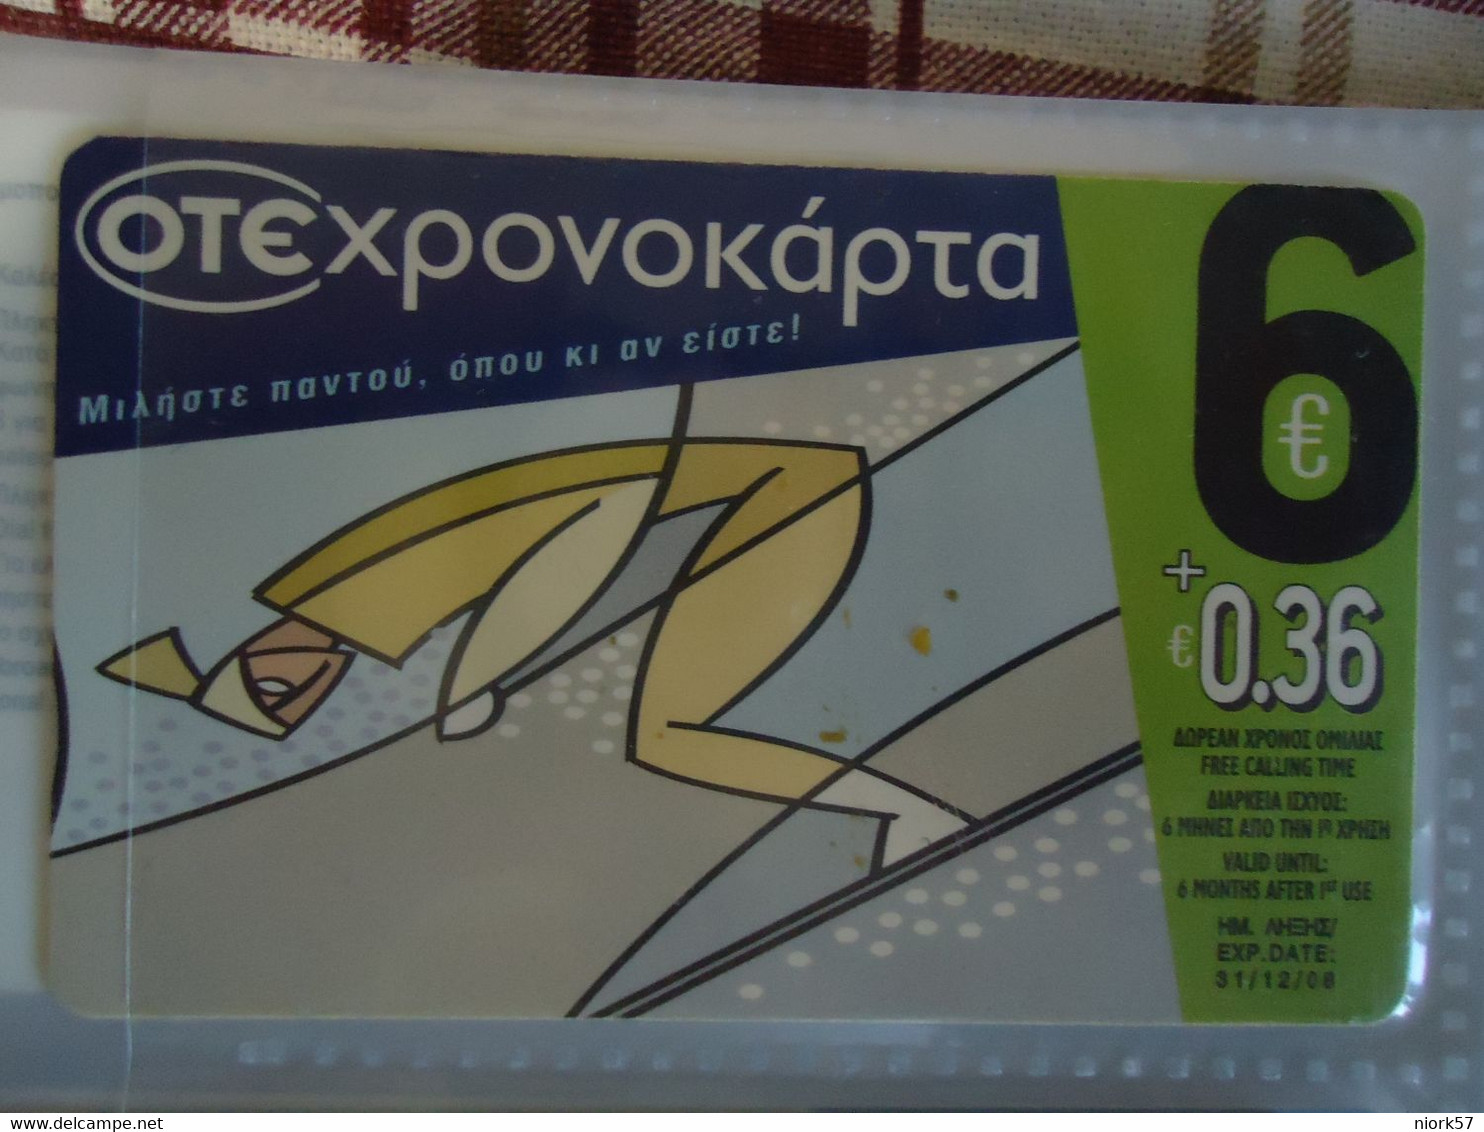 GREECE USED PREPAID CARDS SPORT OLYMPIC GAMES ATHENS 2004 - Olympische Spelen